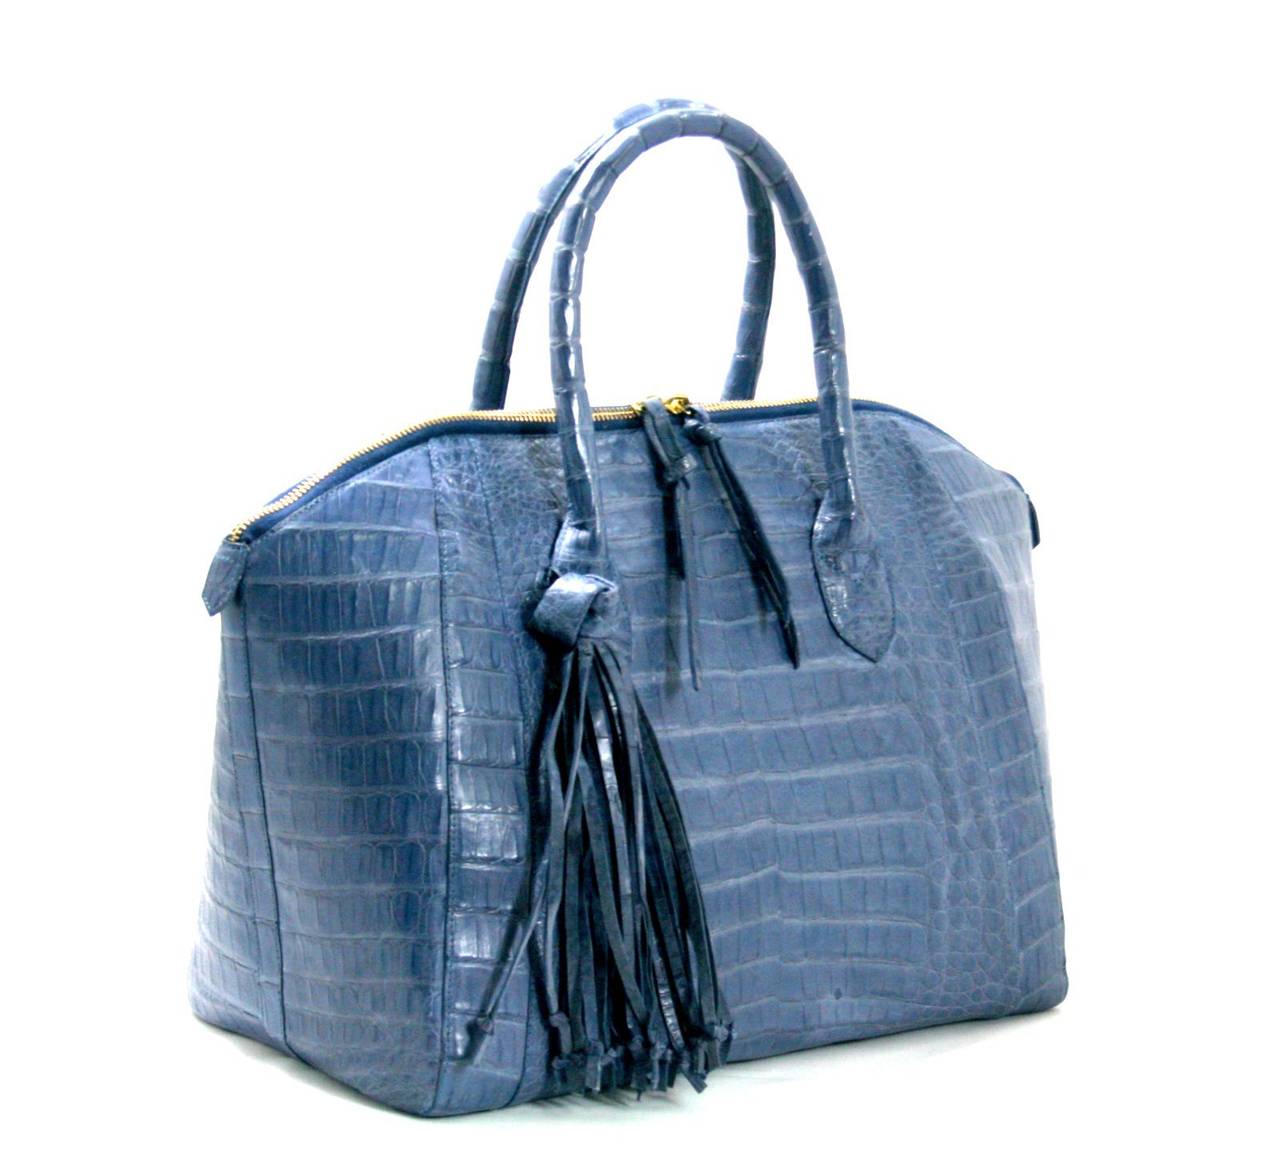 This Periwinkle Crocodile Domed Tassel Satchel from Nancy Gonzalez is a store return in pristine condition, appearing never carried.  Stunning, this cool periwinkle blue adds a sophisticated taste of color to any ensemble.  Currently retailing for